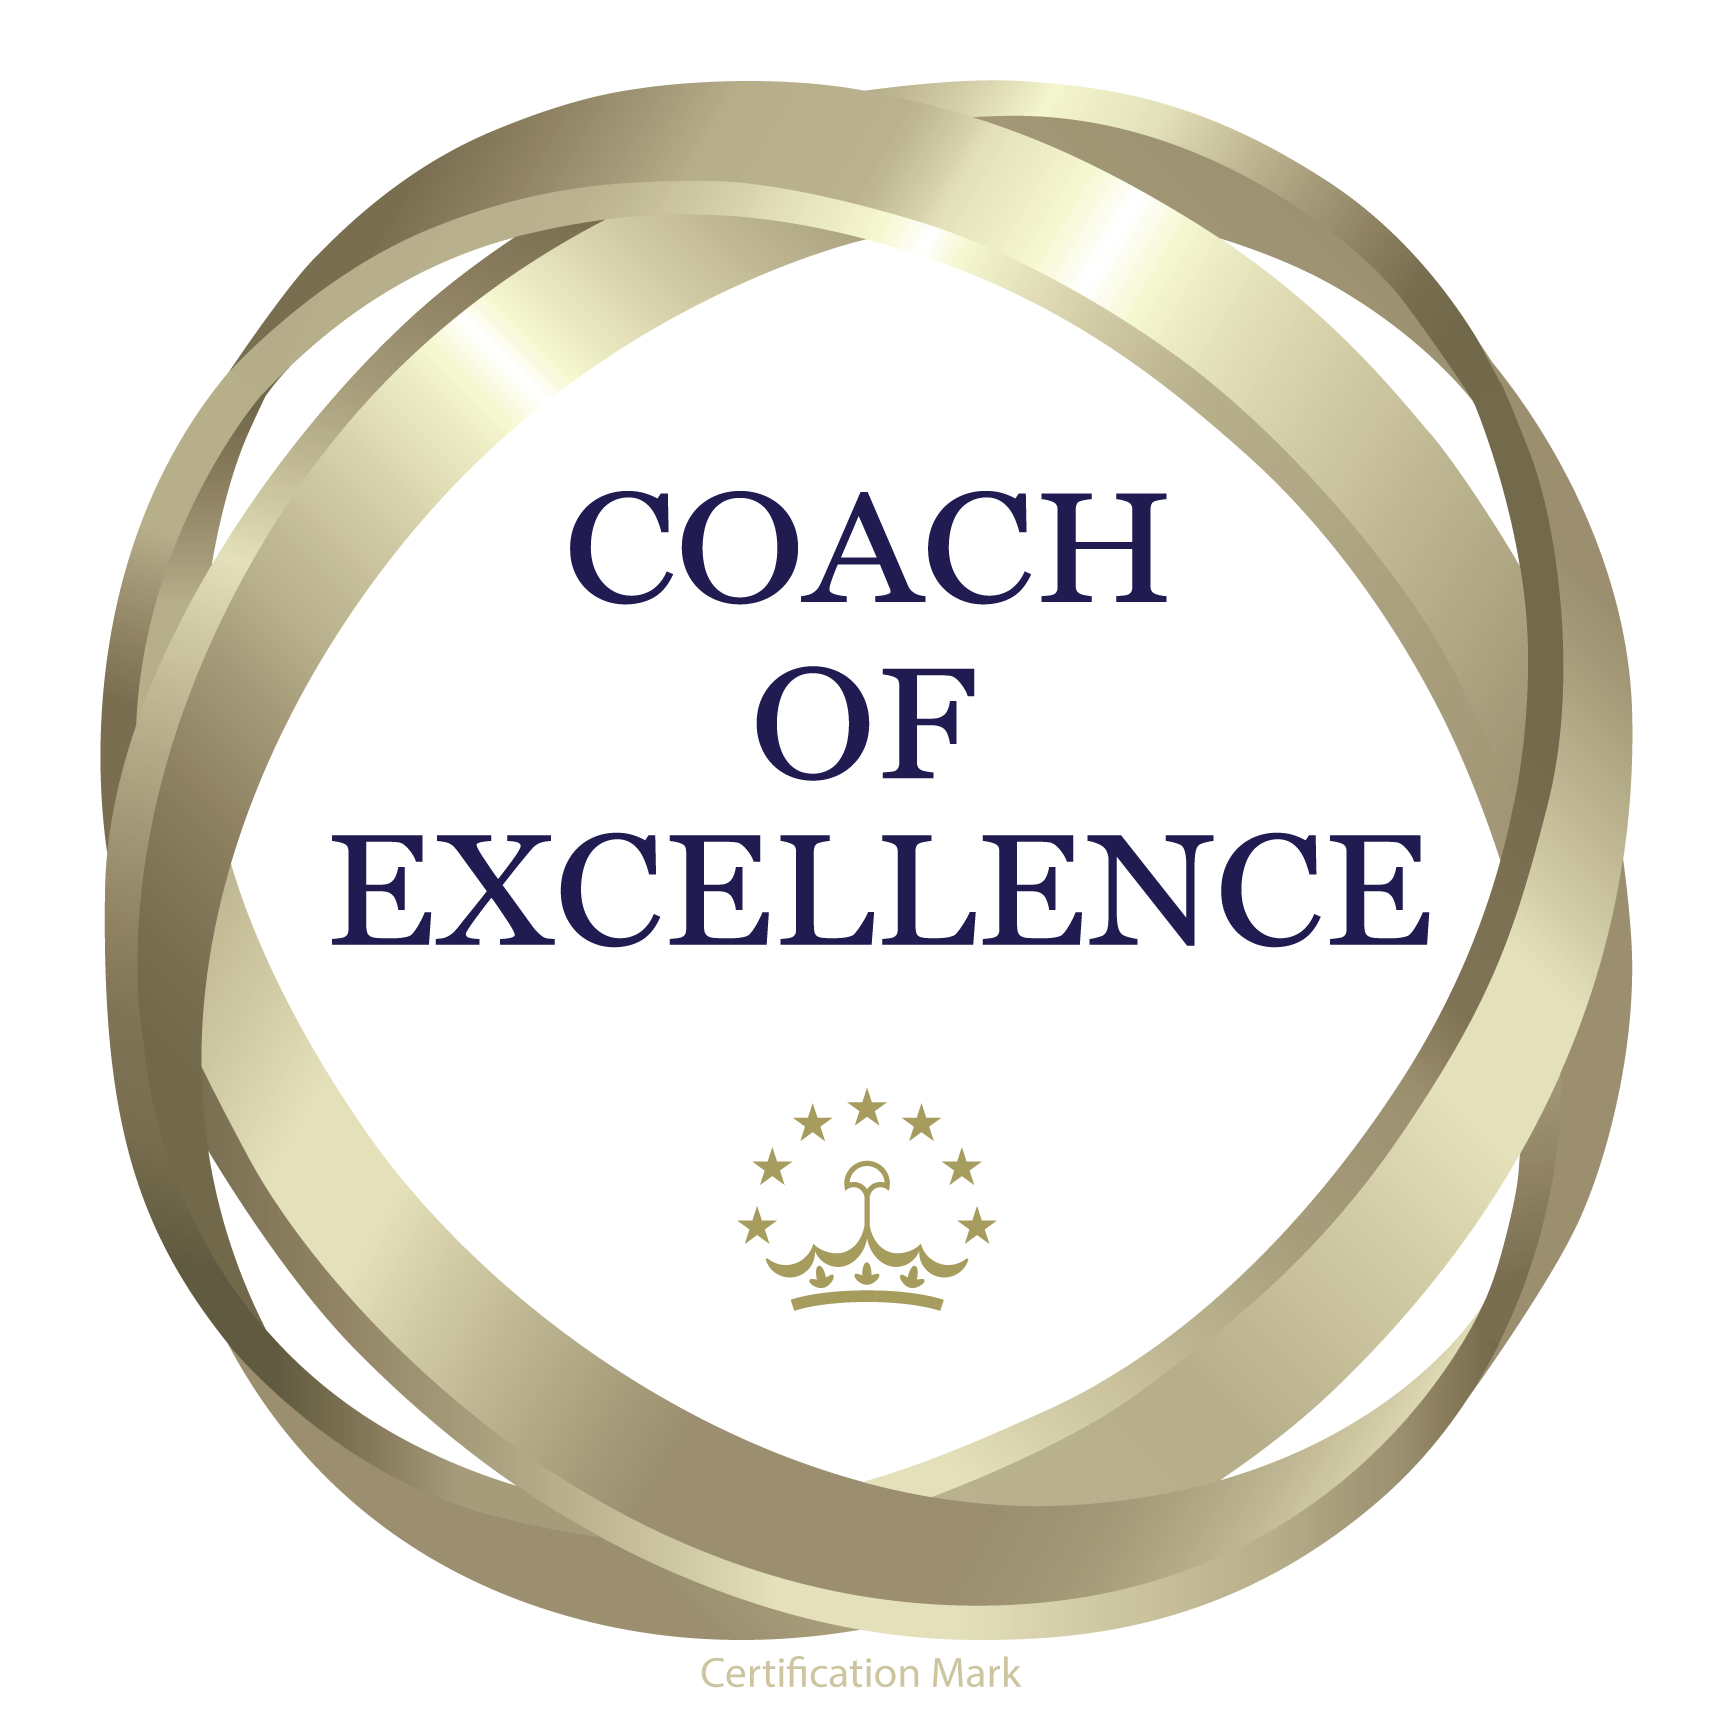 Coach of Excellence